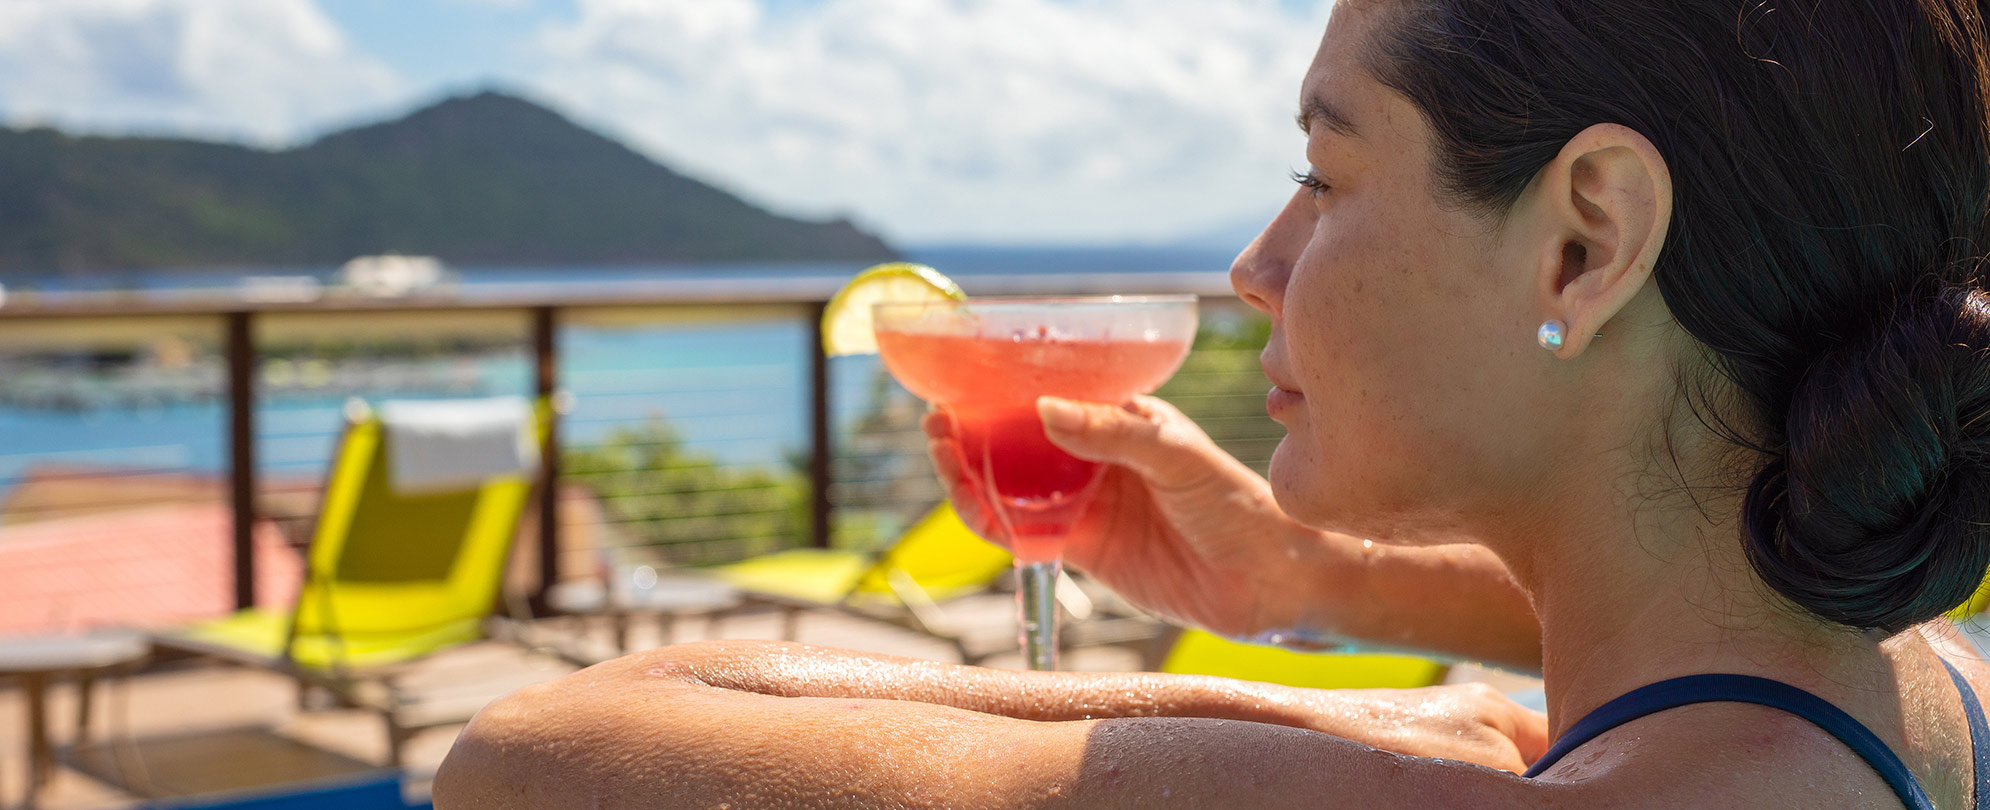 Dark-haired woman looks out over the ocean with a pink margarita in hand, relaxing at a Margaritaville Vacation Club resort.